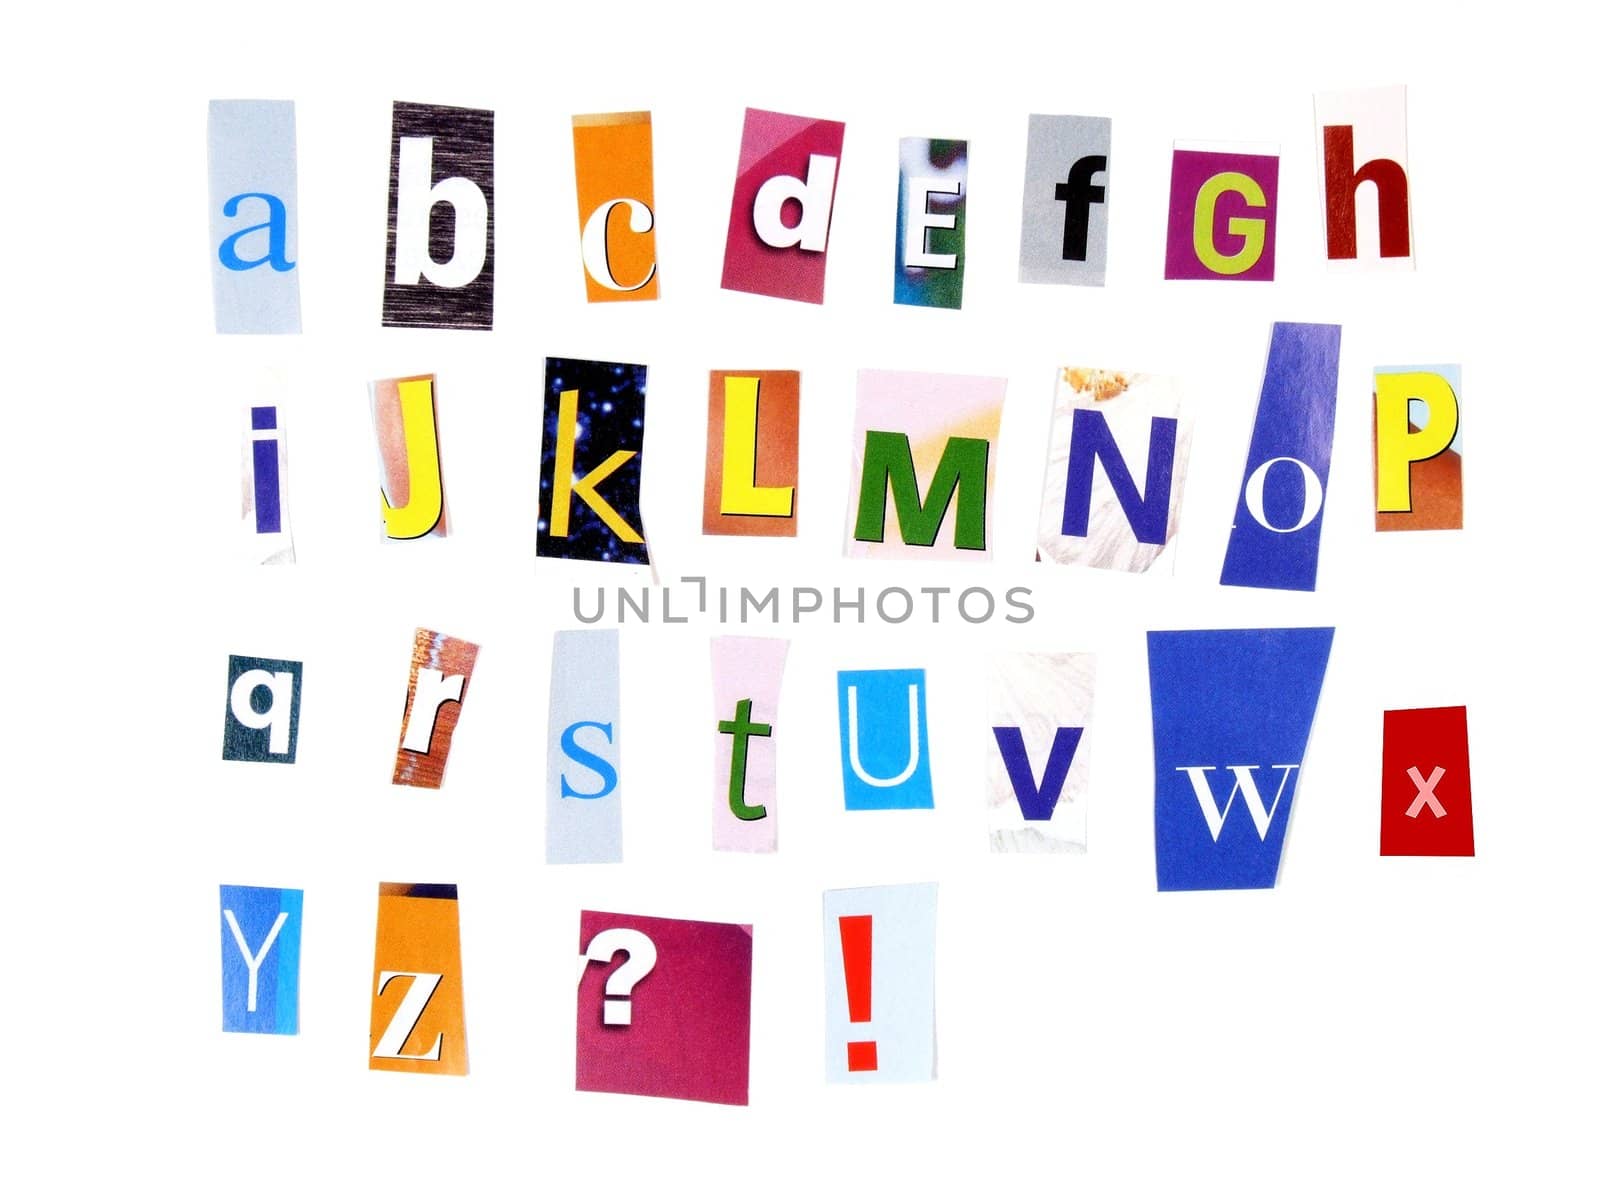 Alphabet made of newspaper clippings - colorful ABC.